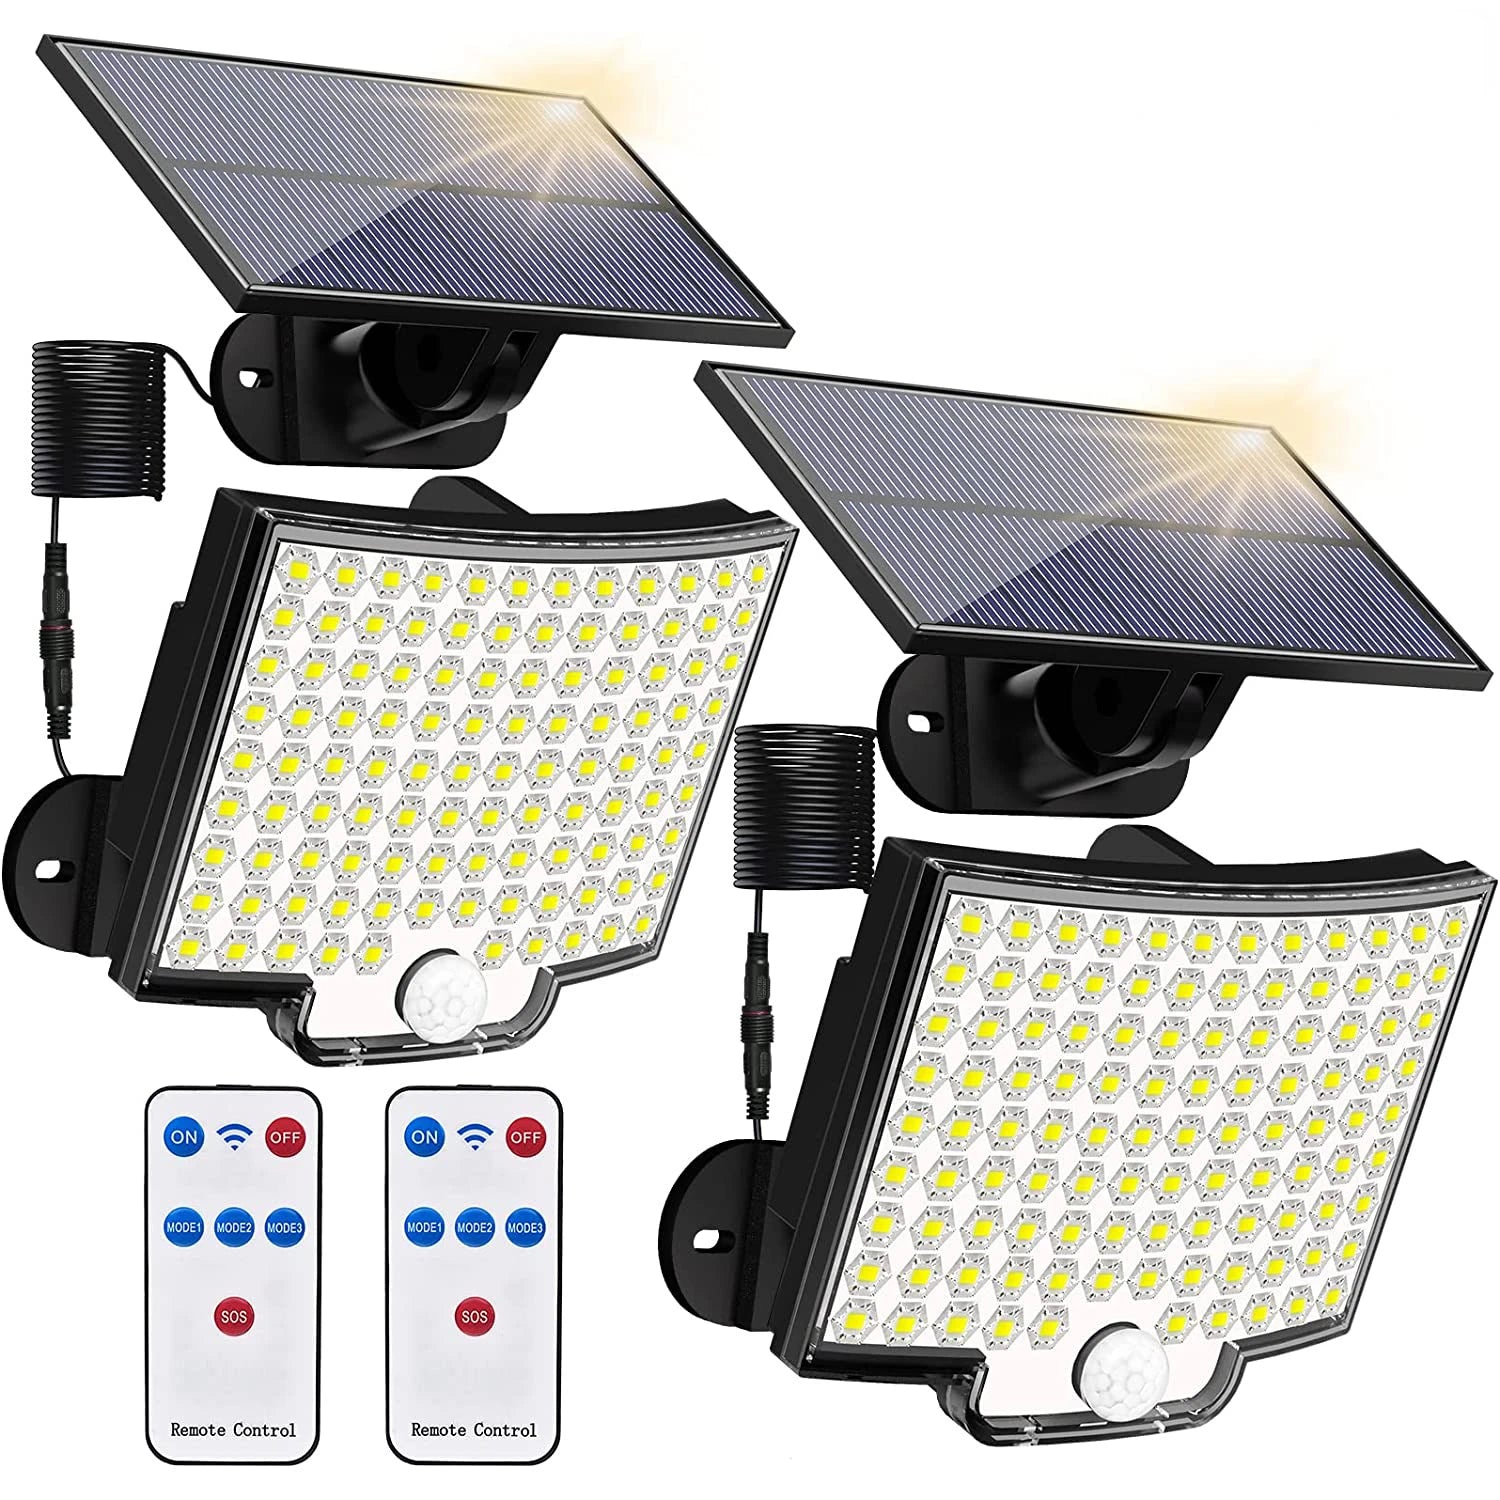 Solar Light, Outdoor lighting with four modes: on/off, SOS signal, remote control, and motion sensor.